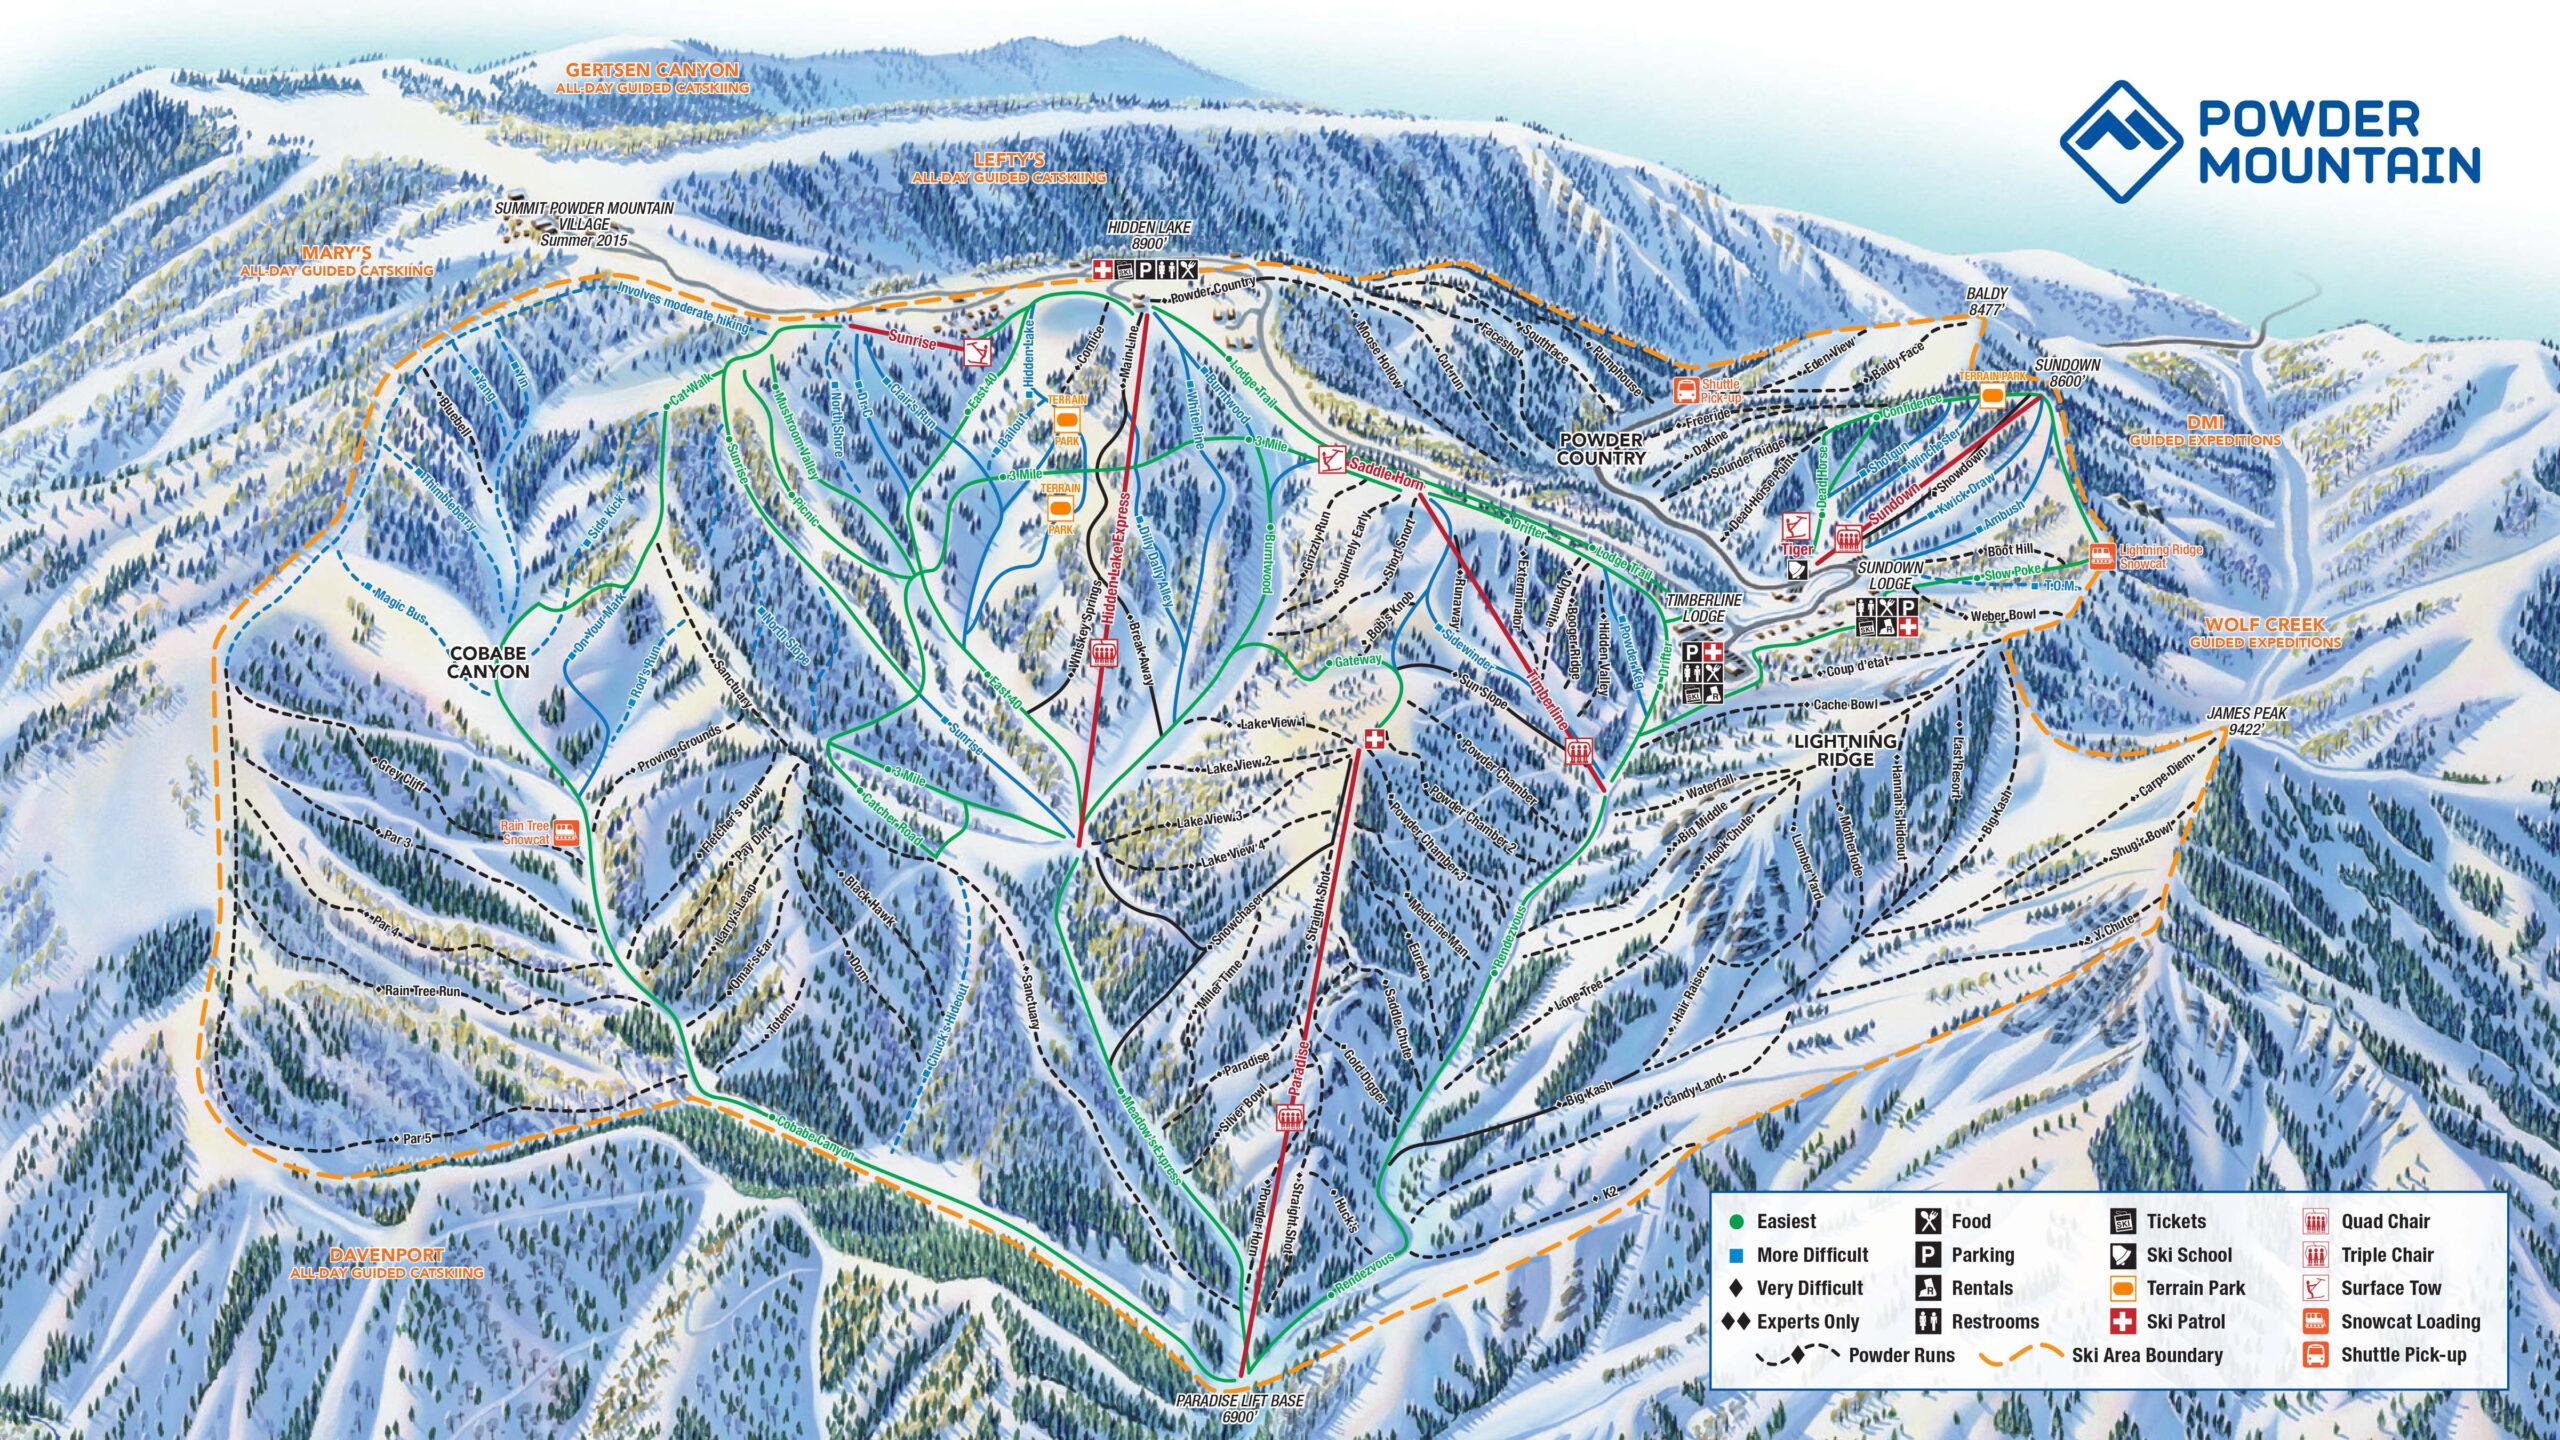 Powder Mountain UT The New Largest Ski Resort In The USA At 8 000 